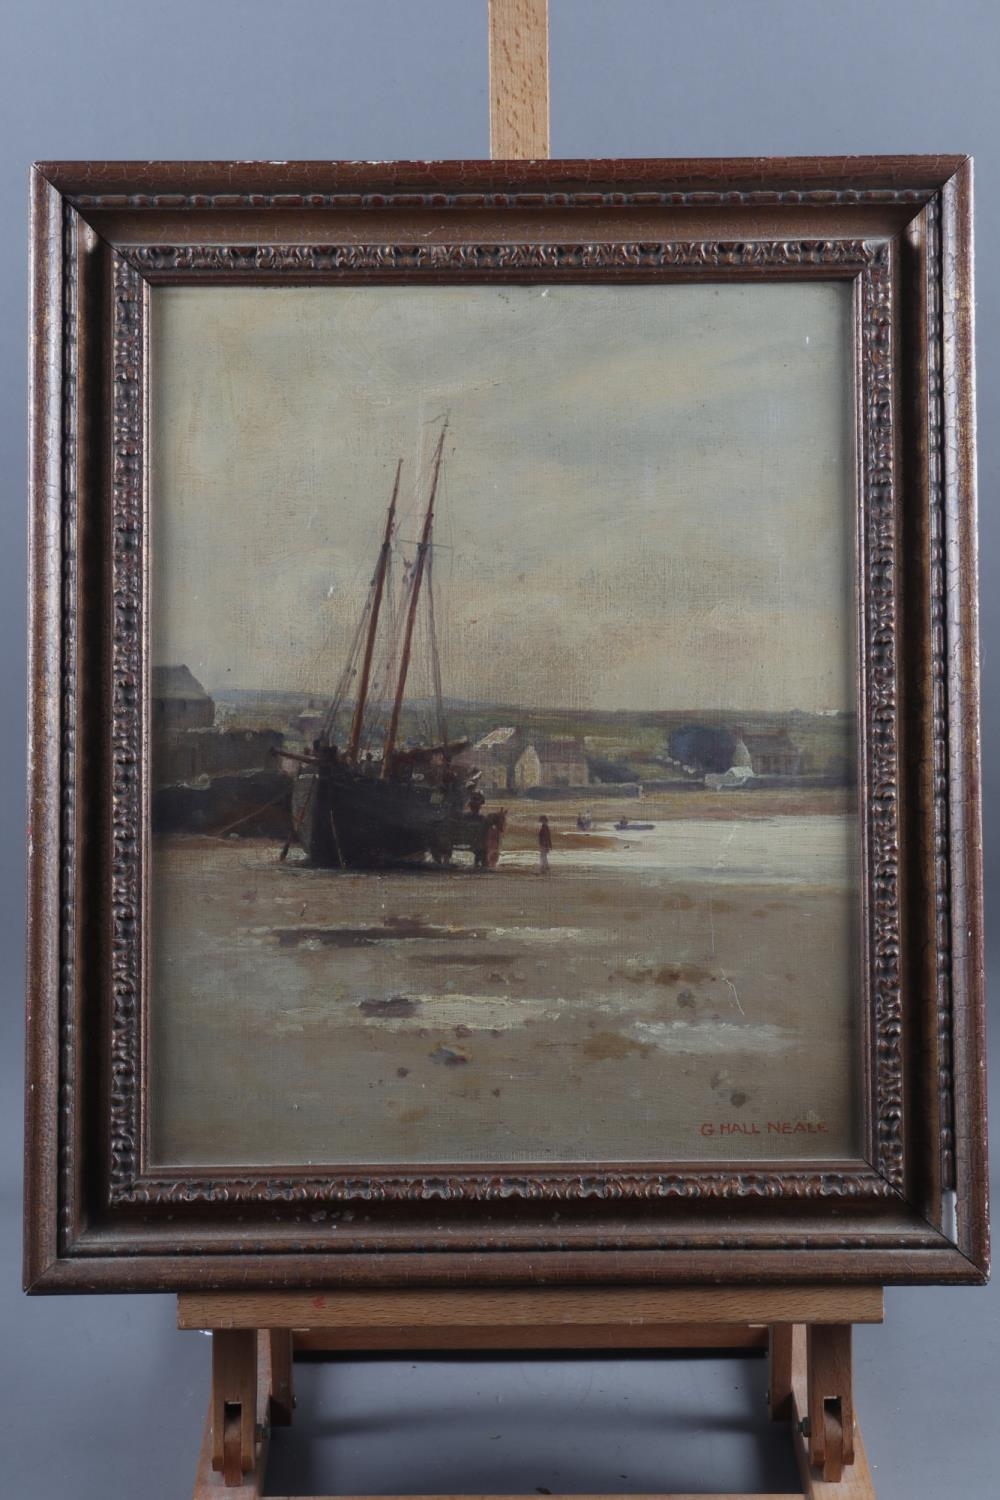 G Hall Neale: oil on board, coastal scene with fishing boat at low tide, 15 1/2" x 12 1/2", in